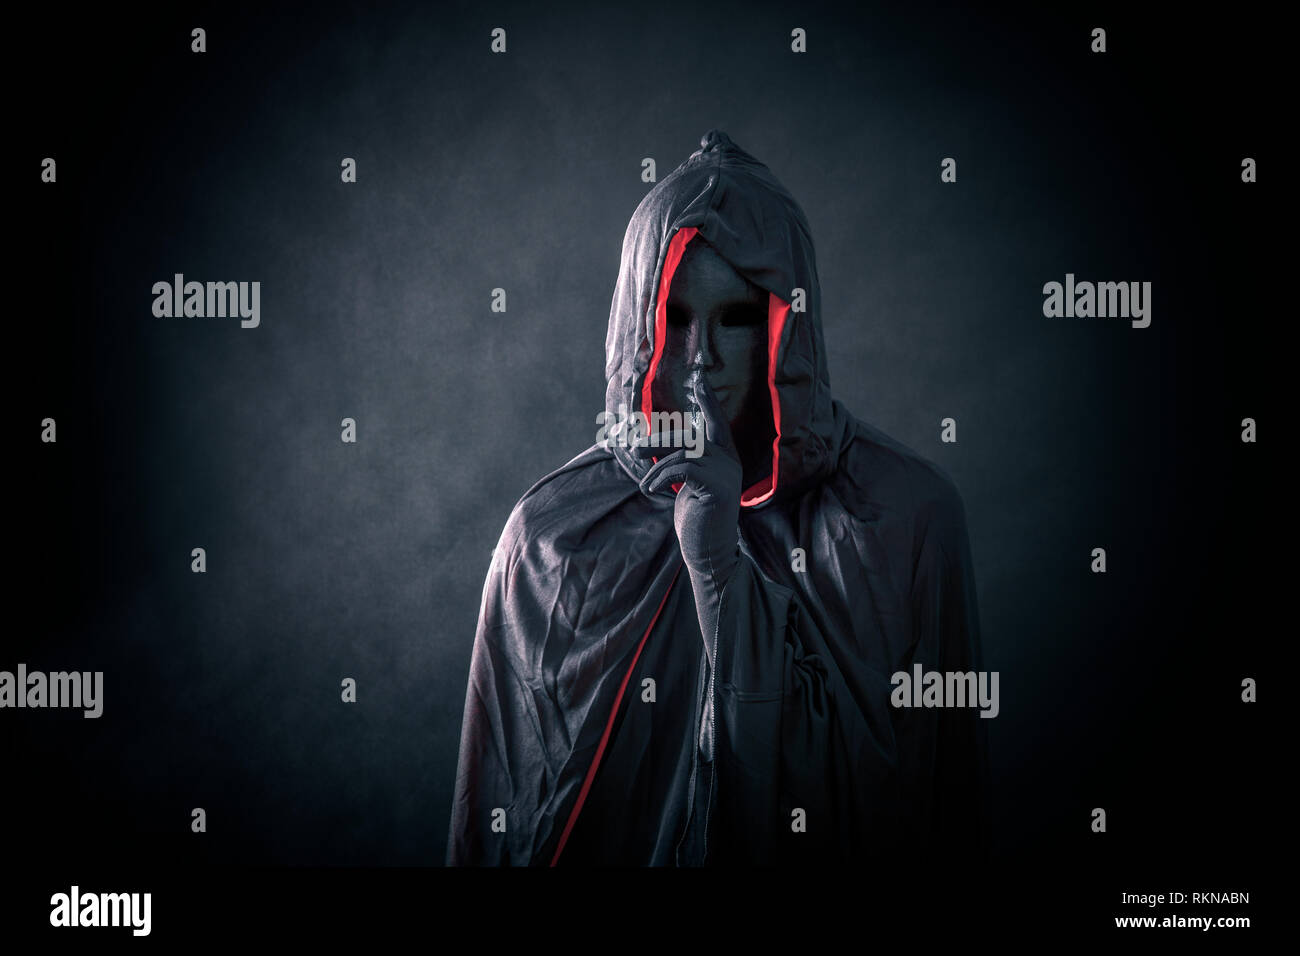 Scary figure with black mask in hooded cloak Stock Photo